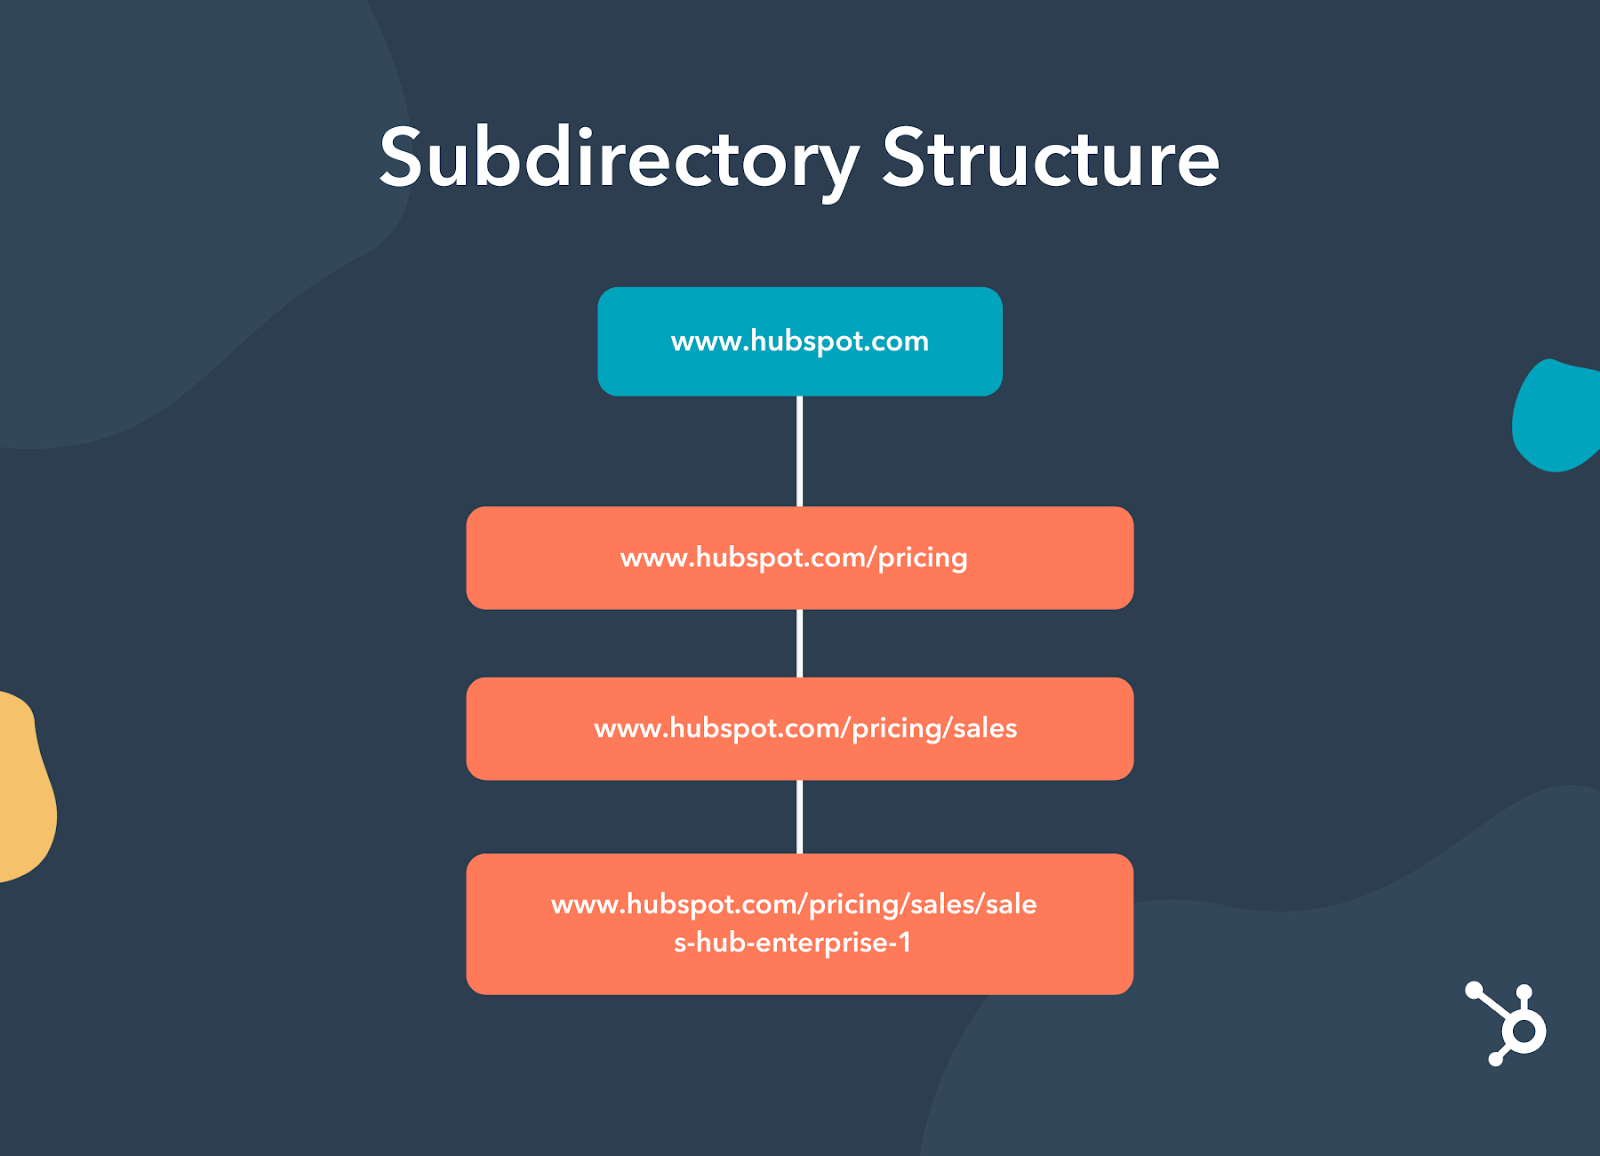 subdirectory search console international contry tagre